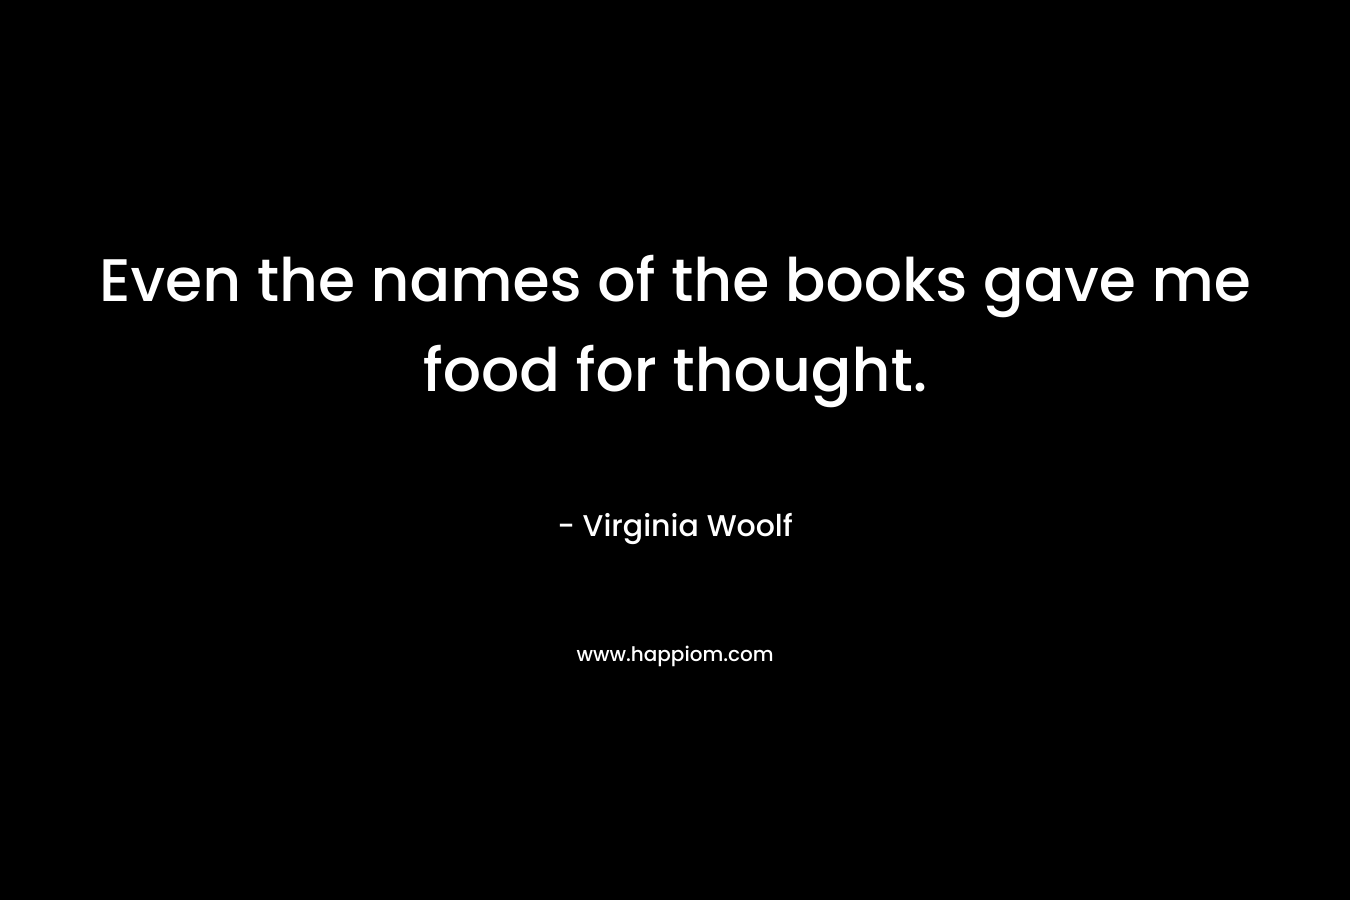 Even the names of the books gave me food for thought.